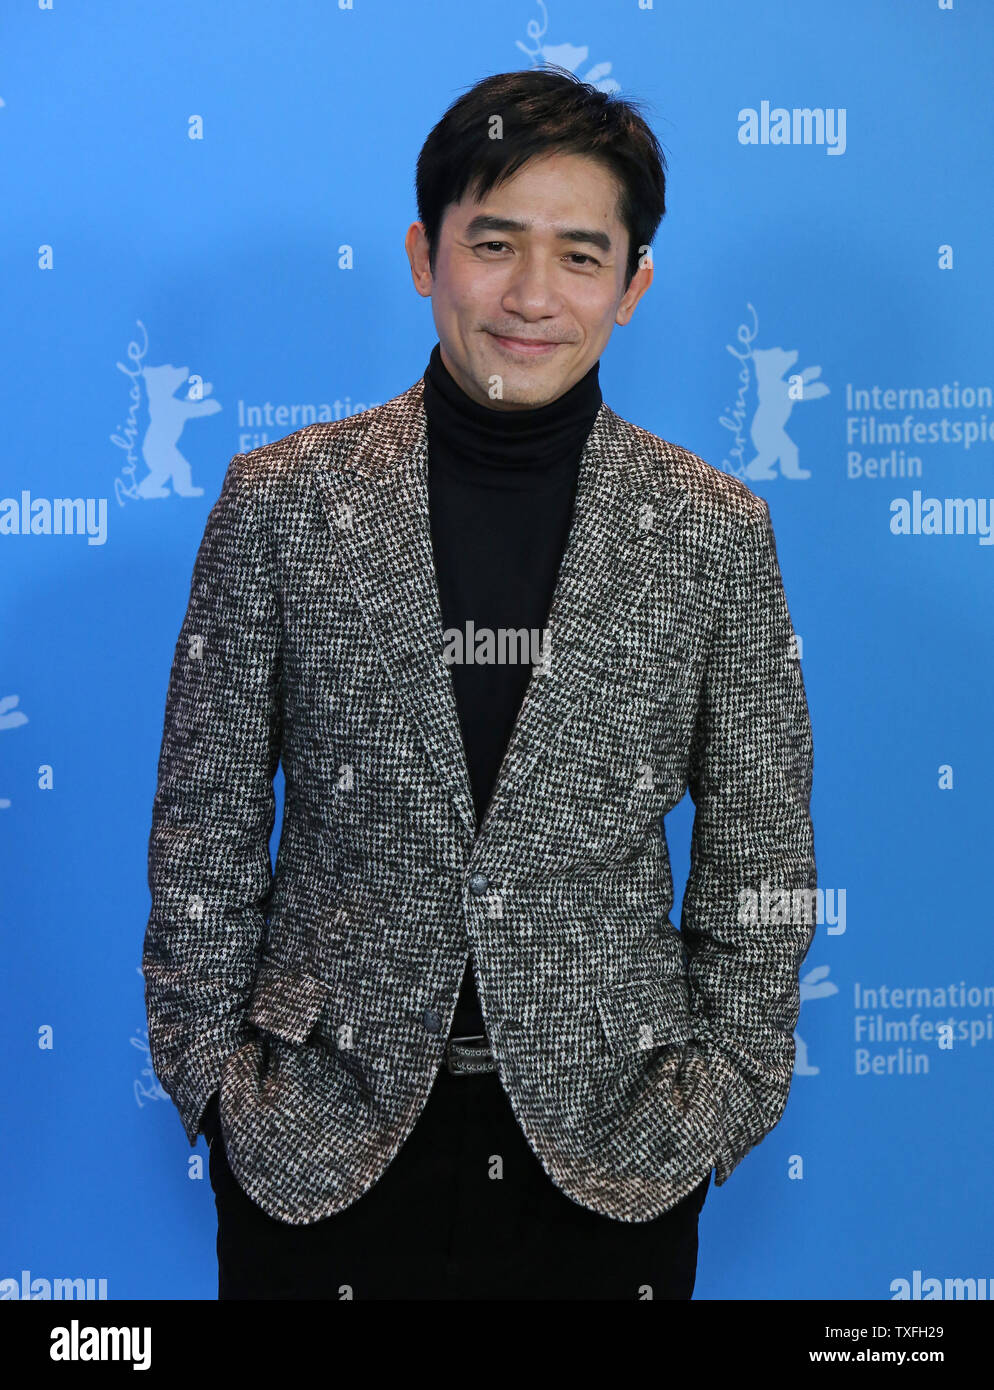 Tony Leung Chiu Wai arrives at the photo call for the film 'The Grandmaster' during the opening of the 63rd Berlinale Film Festival in Berlin on February 7, 2013.   UPI/David Silpa Stock Photo